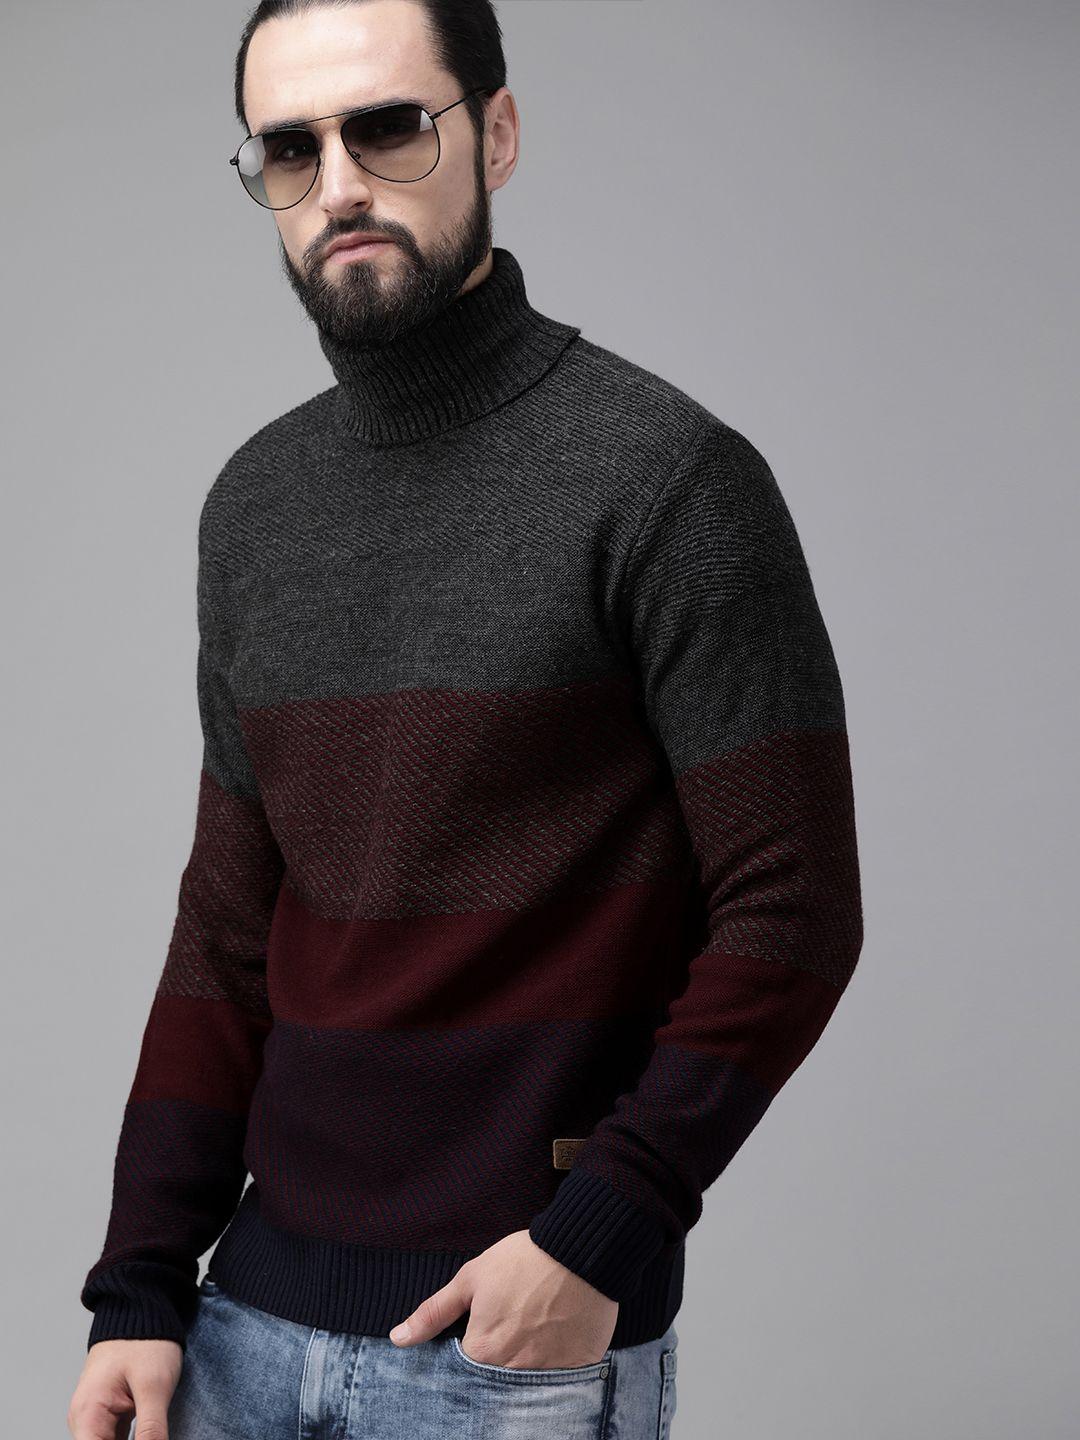 the roadster lifestyle co men maroon & charcoal grey colourblocked pullover sweater